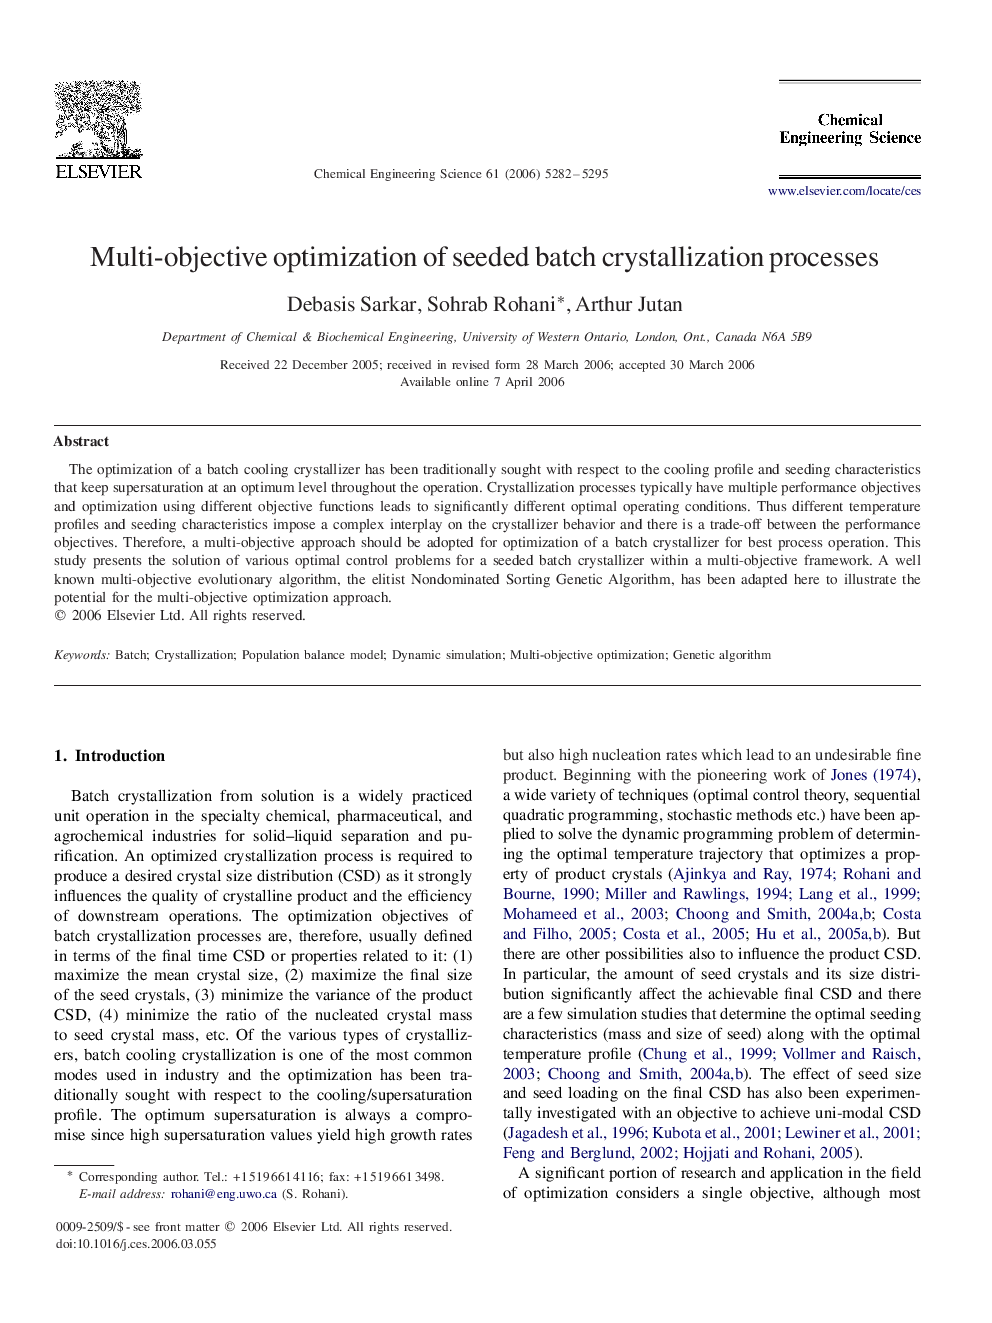 Multi-objective optimization of seeded batch crystallization processes